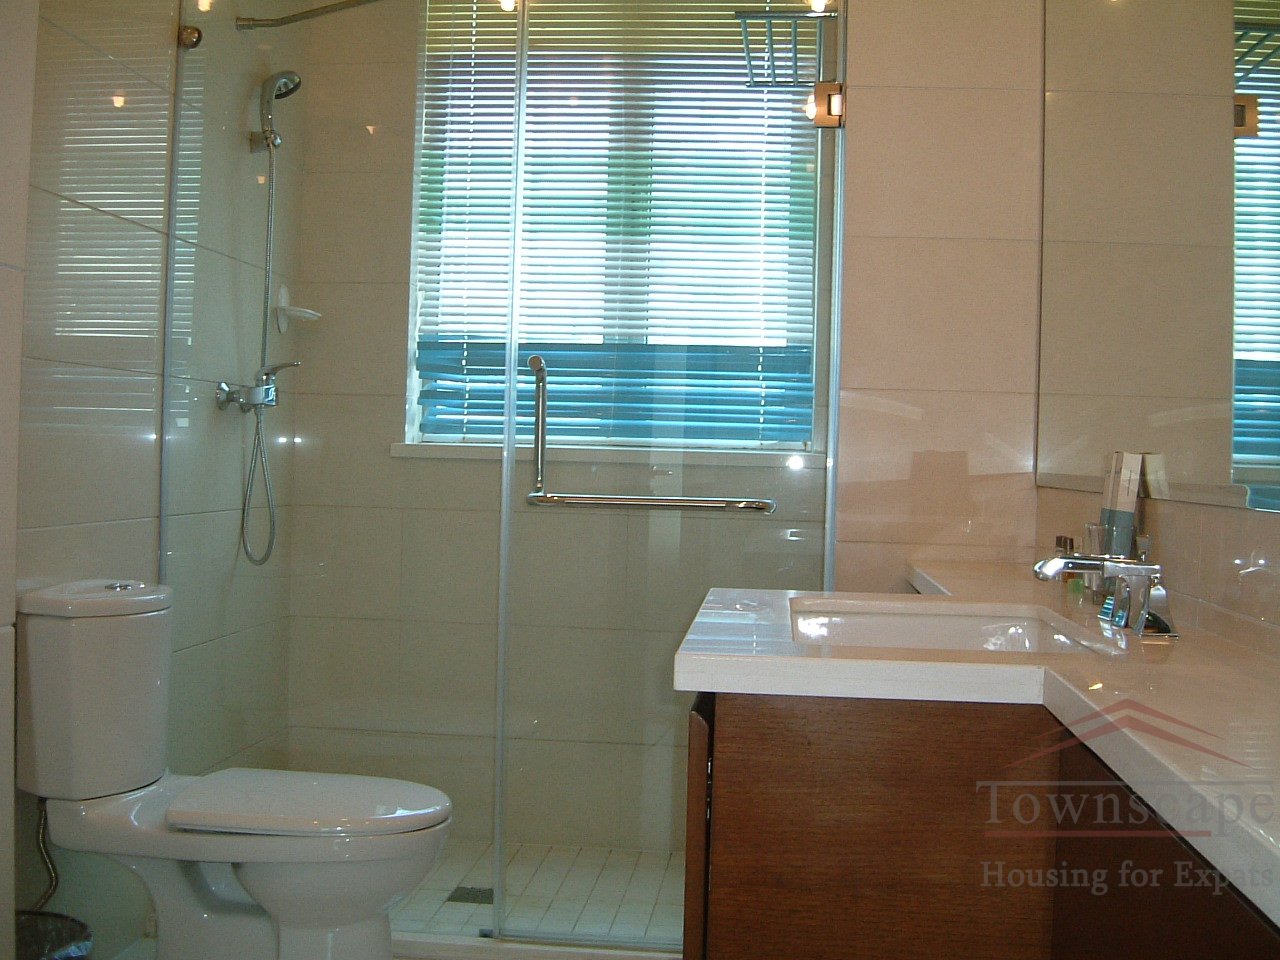 v Modern 3BR Apartment in Pudong, next to Century Park